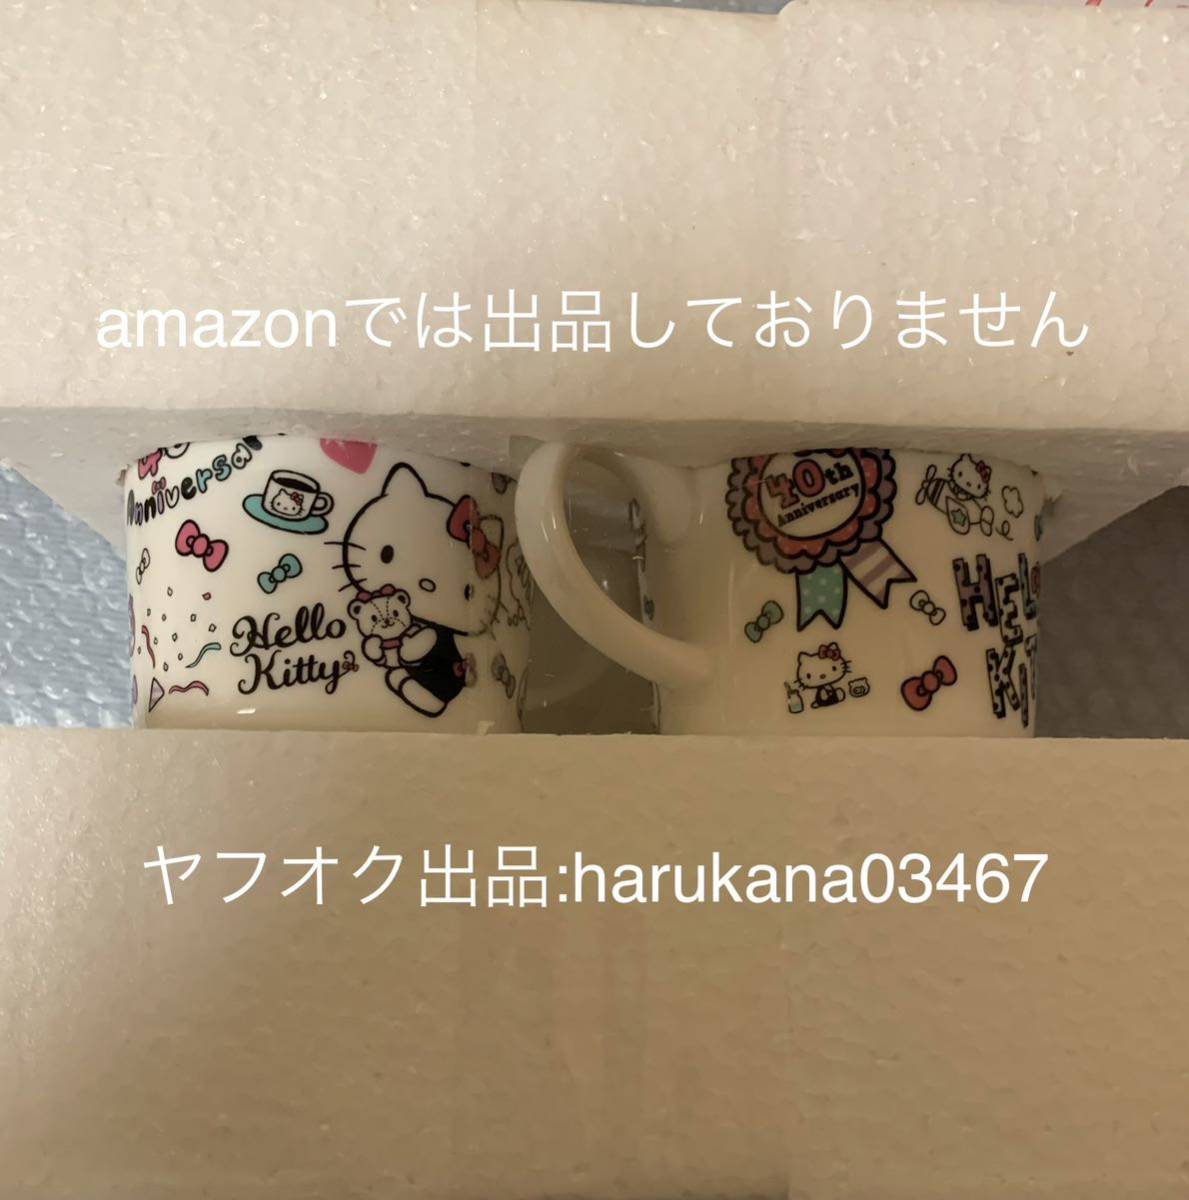  unused goods that time thing Hello Kitty Hello Kitty pair cup & saucer box attaching Sanrio 40th Anniversary 40 anniversary 2014 year goods 